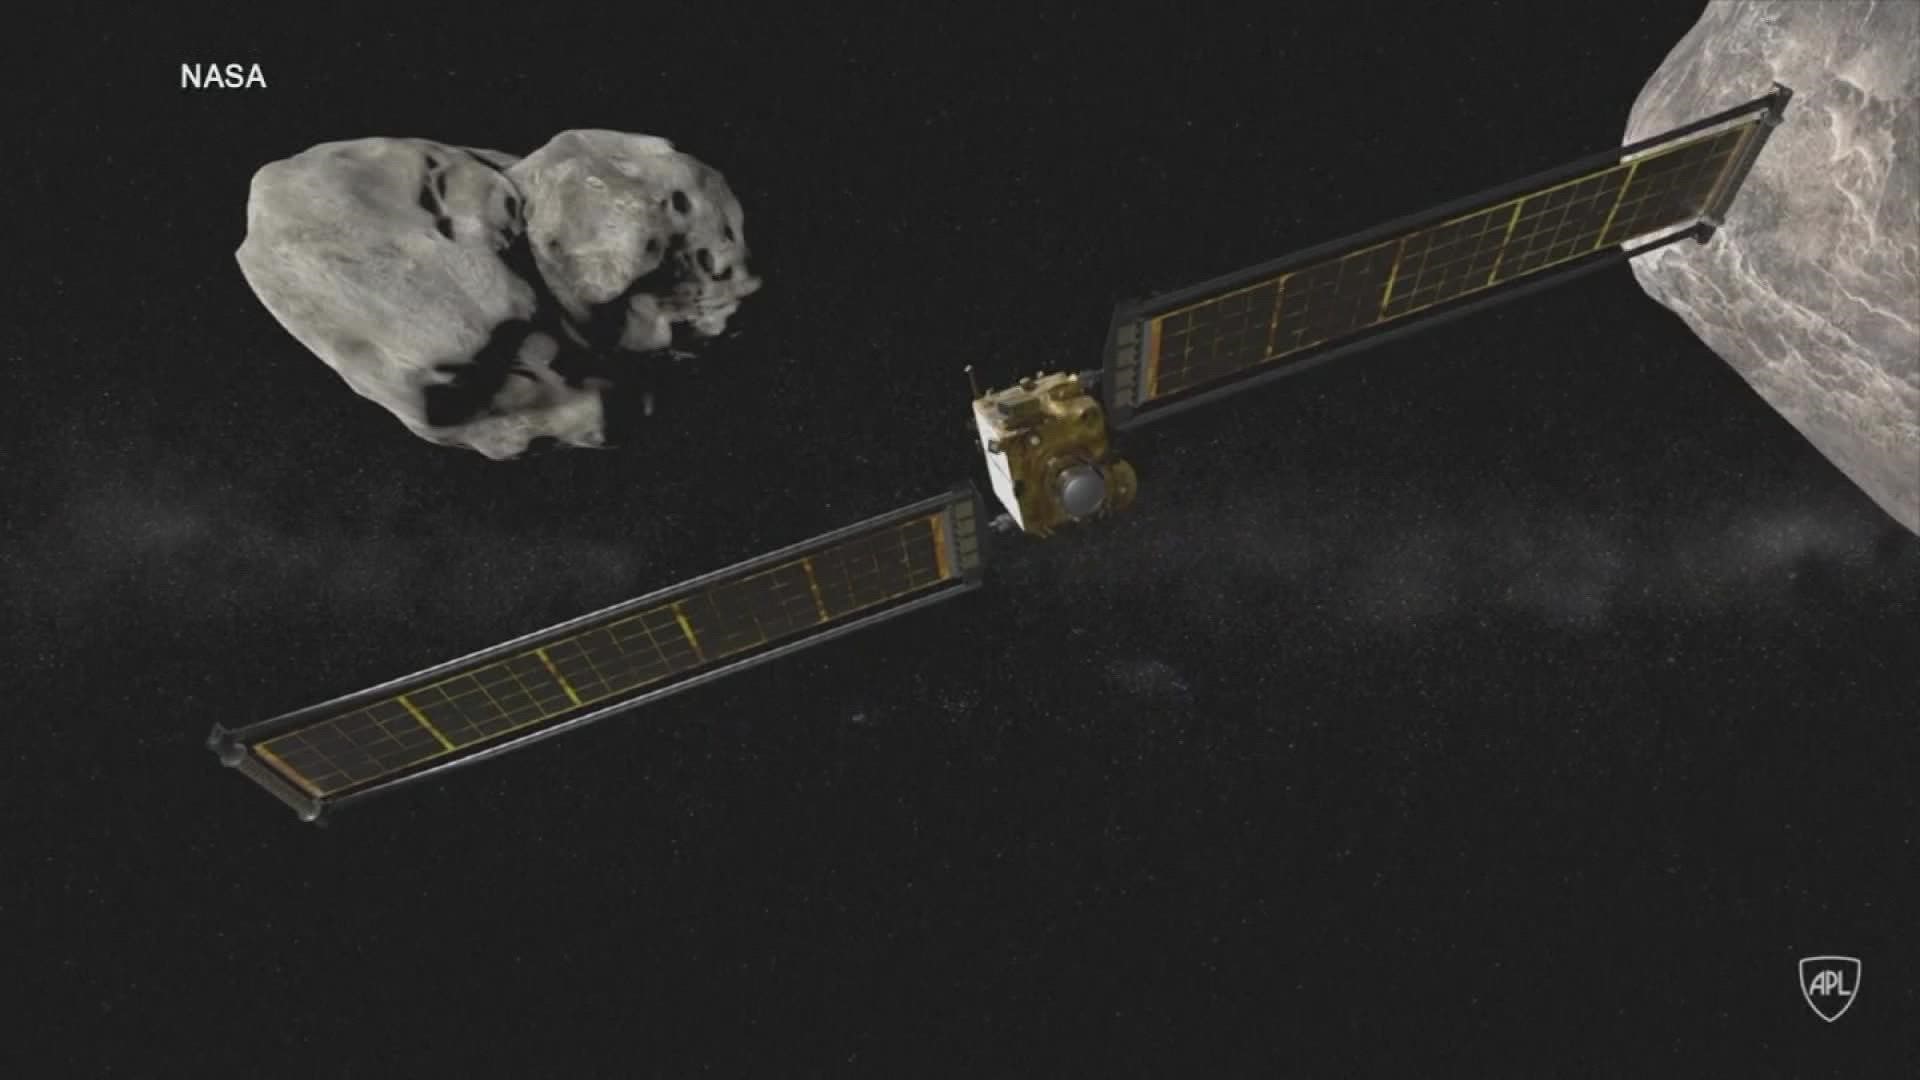 NASA launched the spacecraft in hopes of hitting an asteroid into a tighter orbit, which could be a method used to divert a potential asteroid headed to Earth.